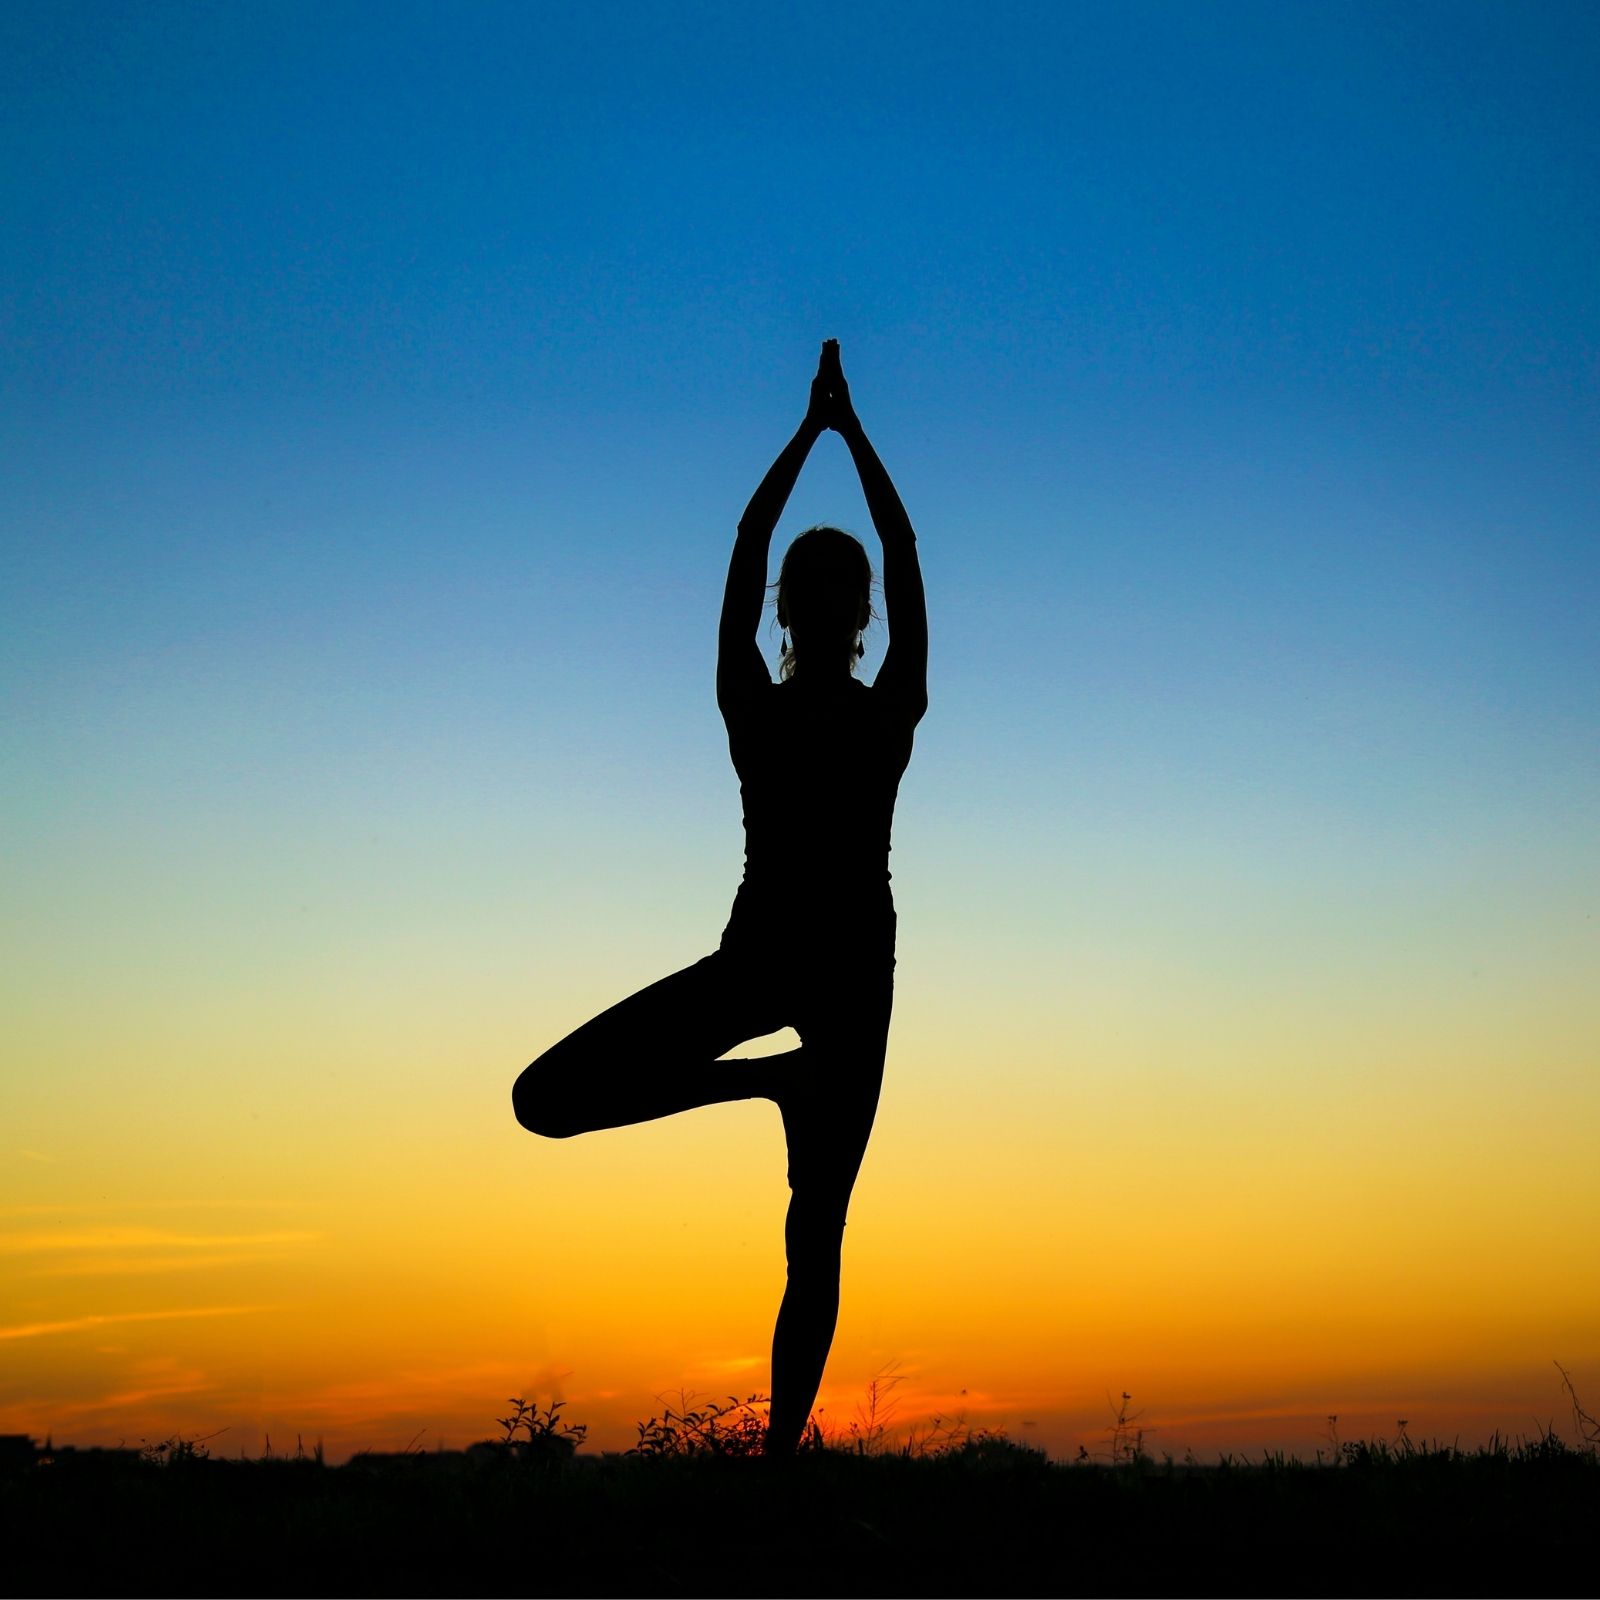 Transform Your Practice with Ekam Yoga's Online Yoga Sessions